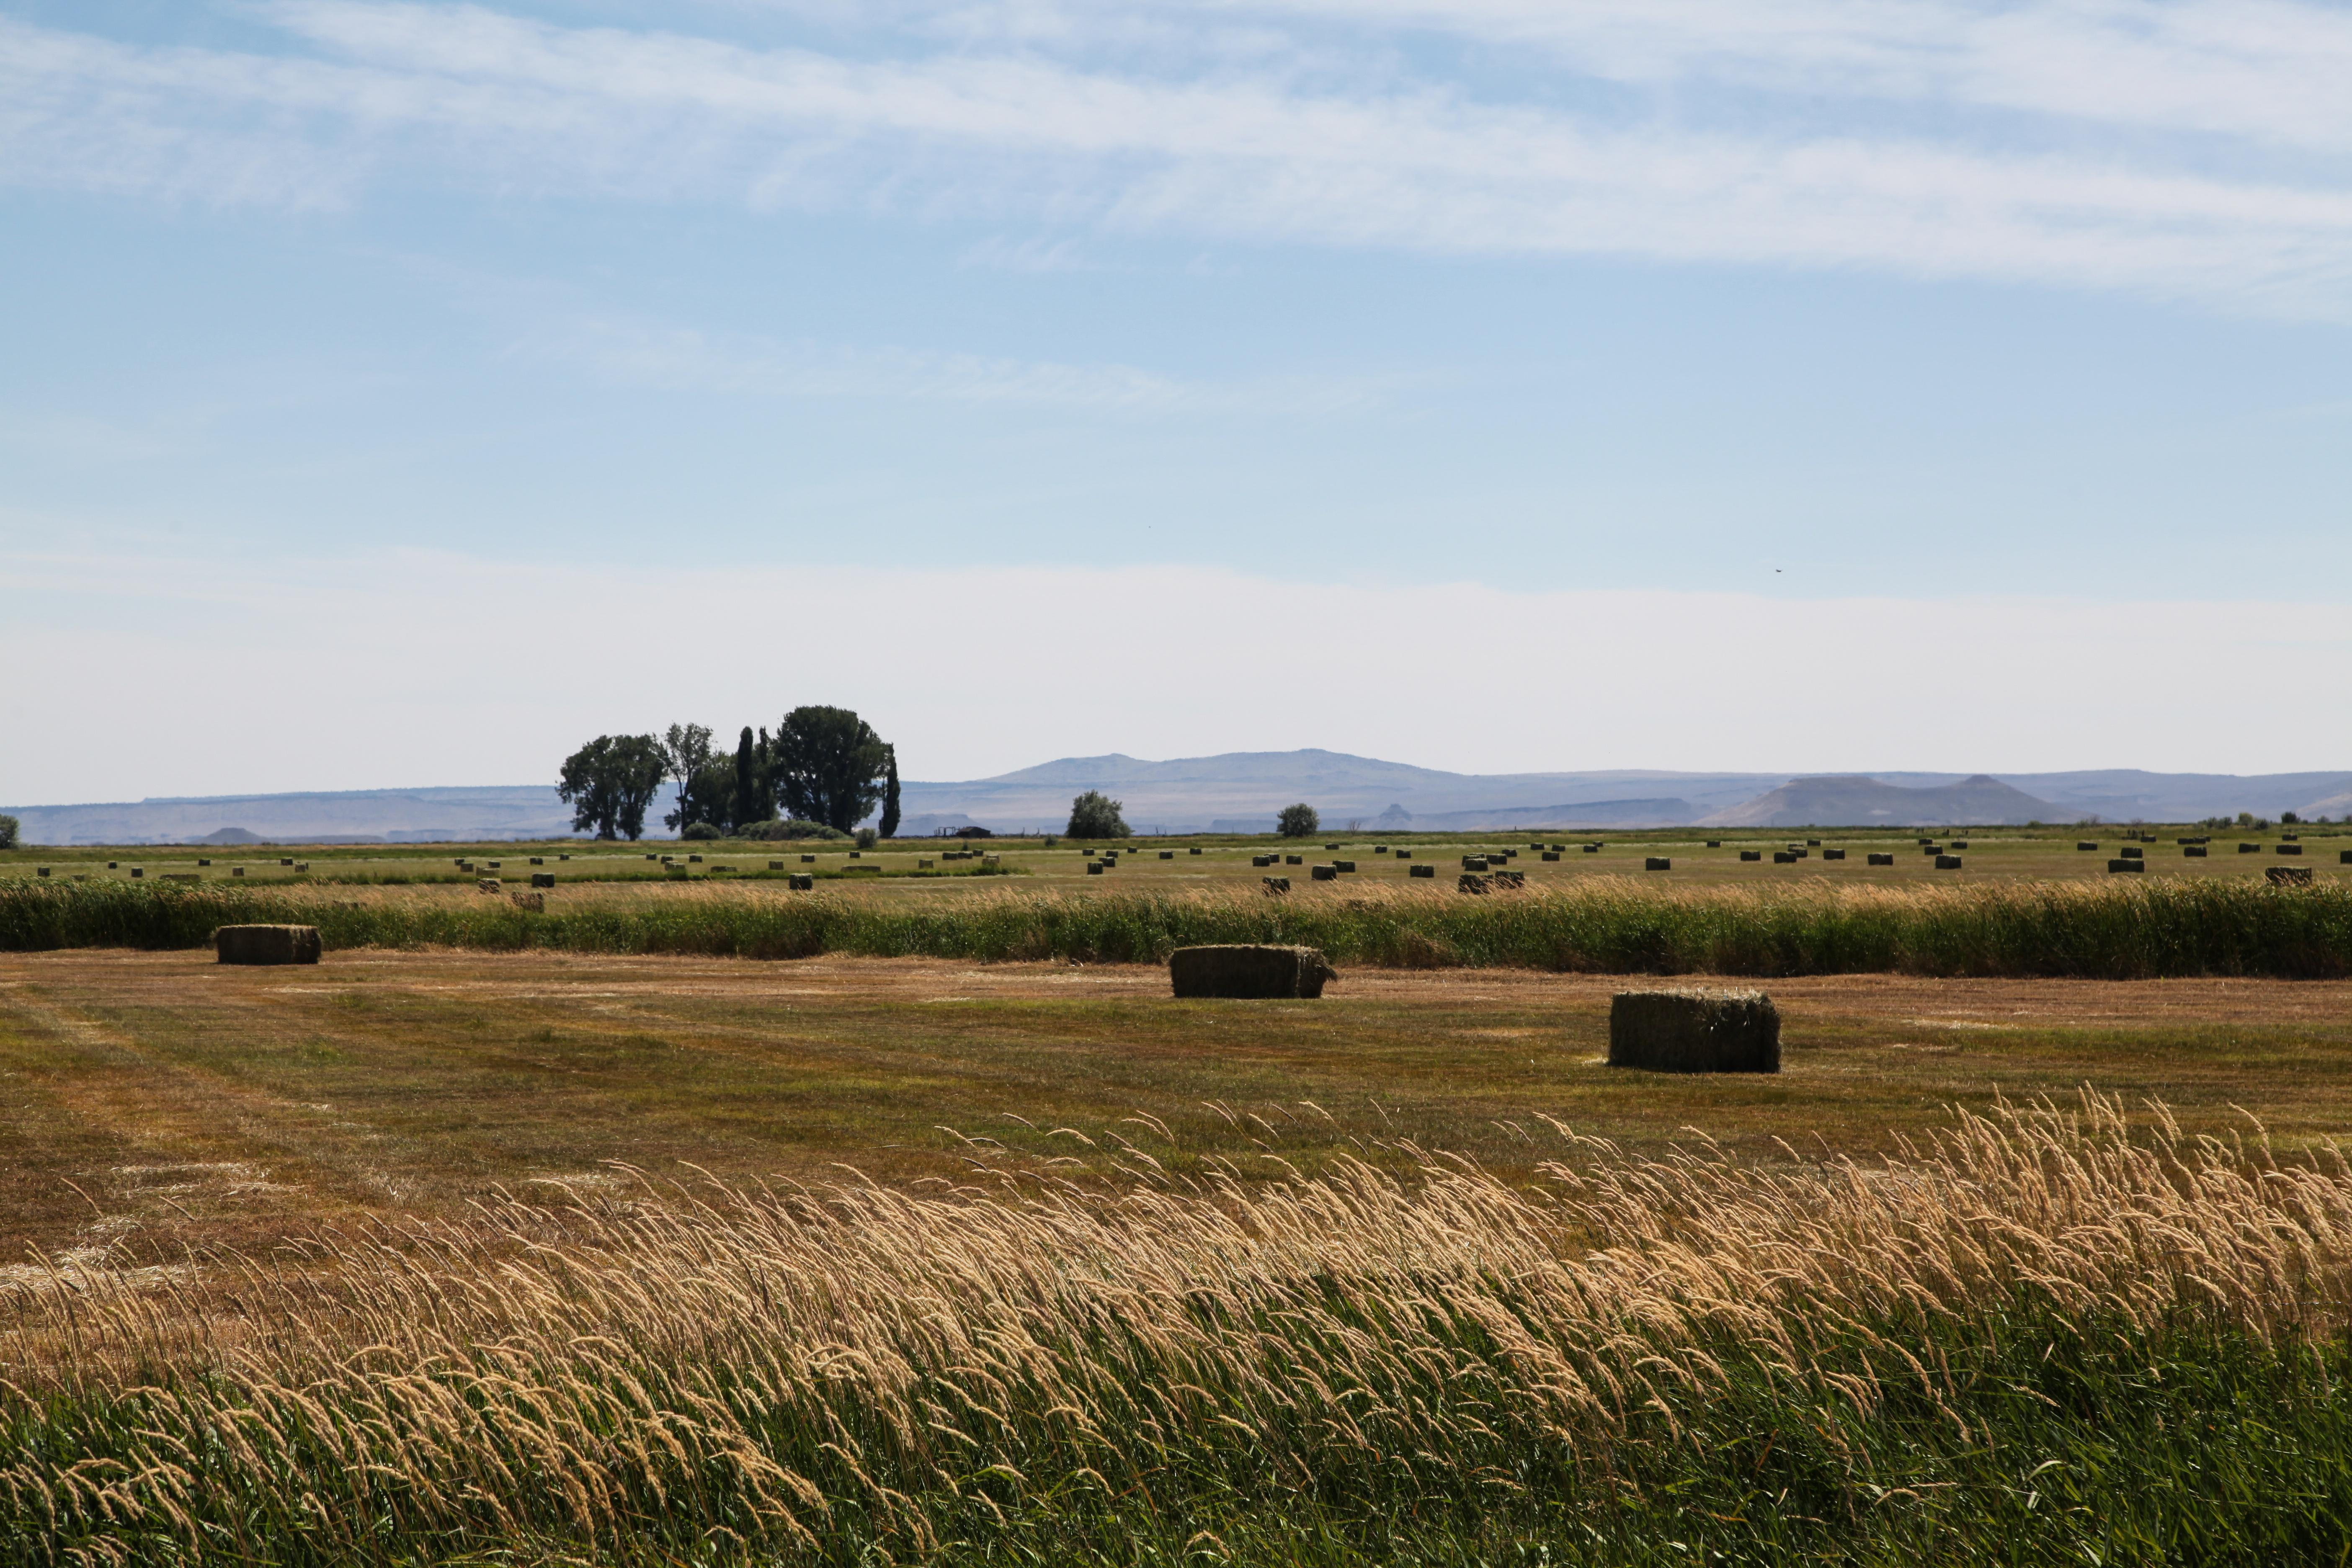 A view from the Malheur National Wildlife Refuge in Eastern Oregon.